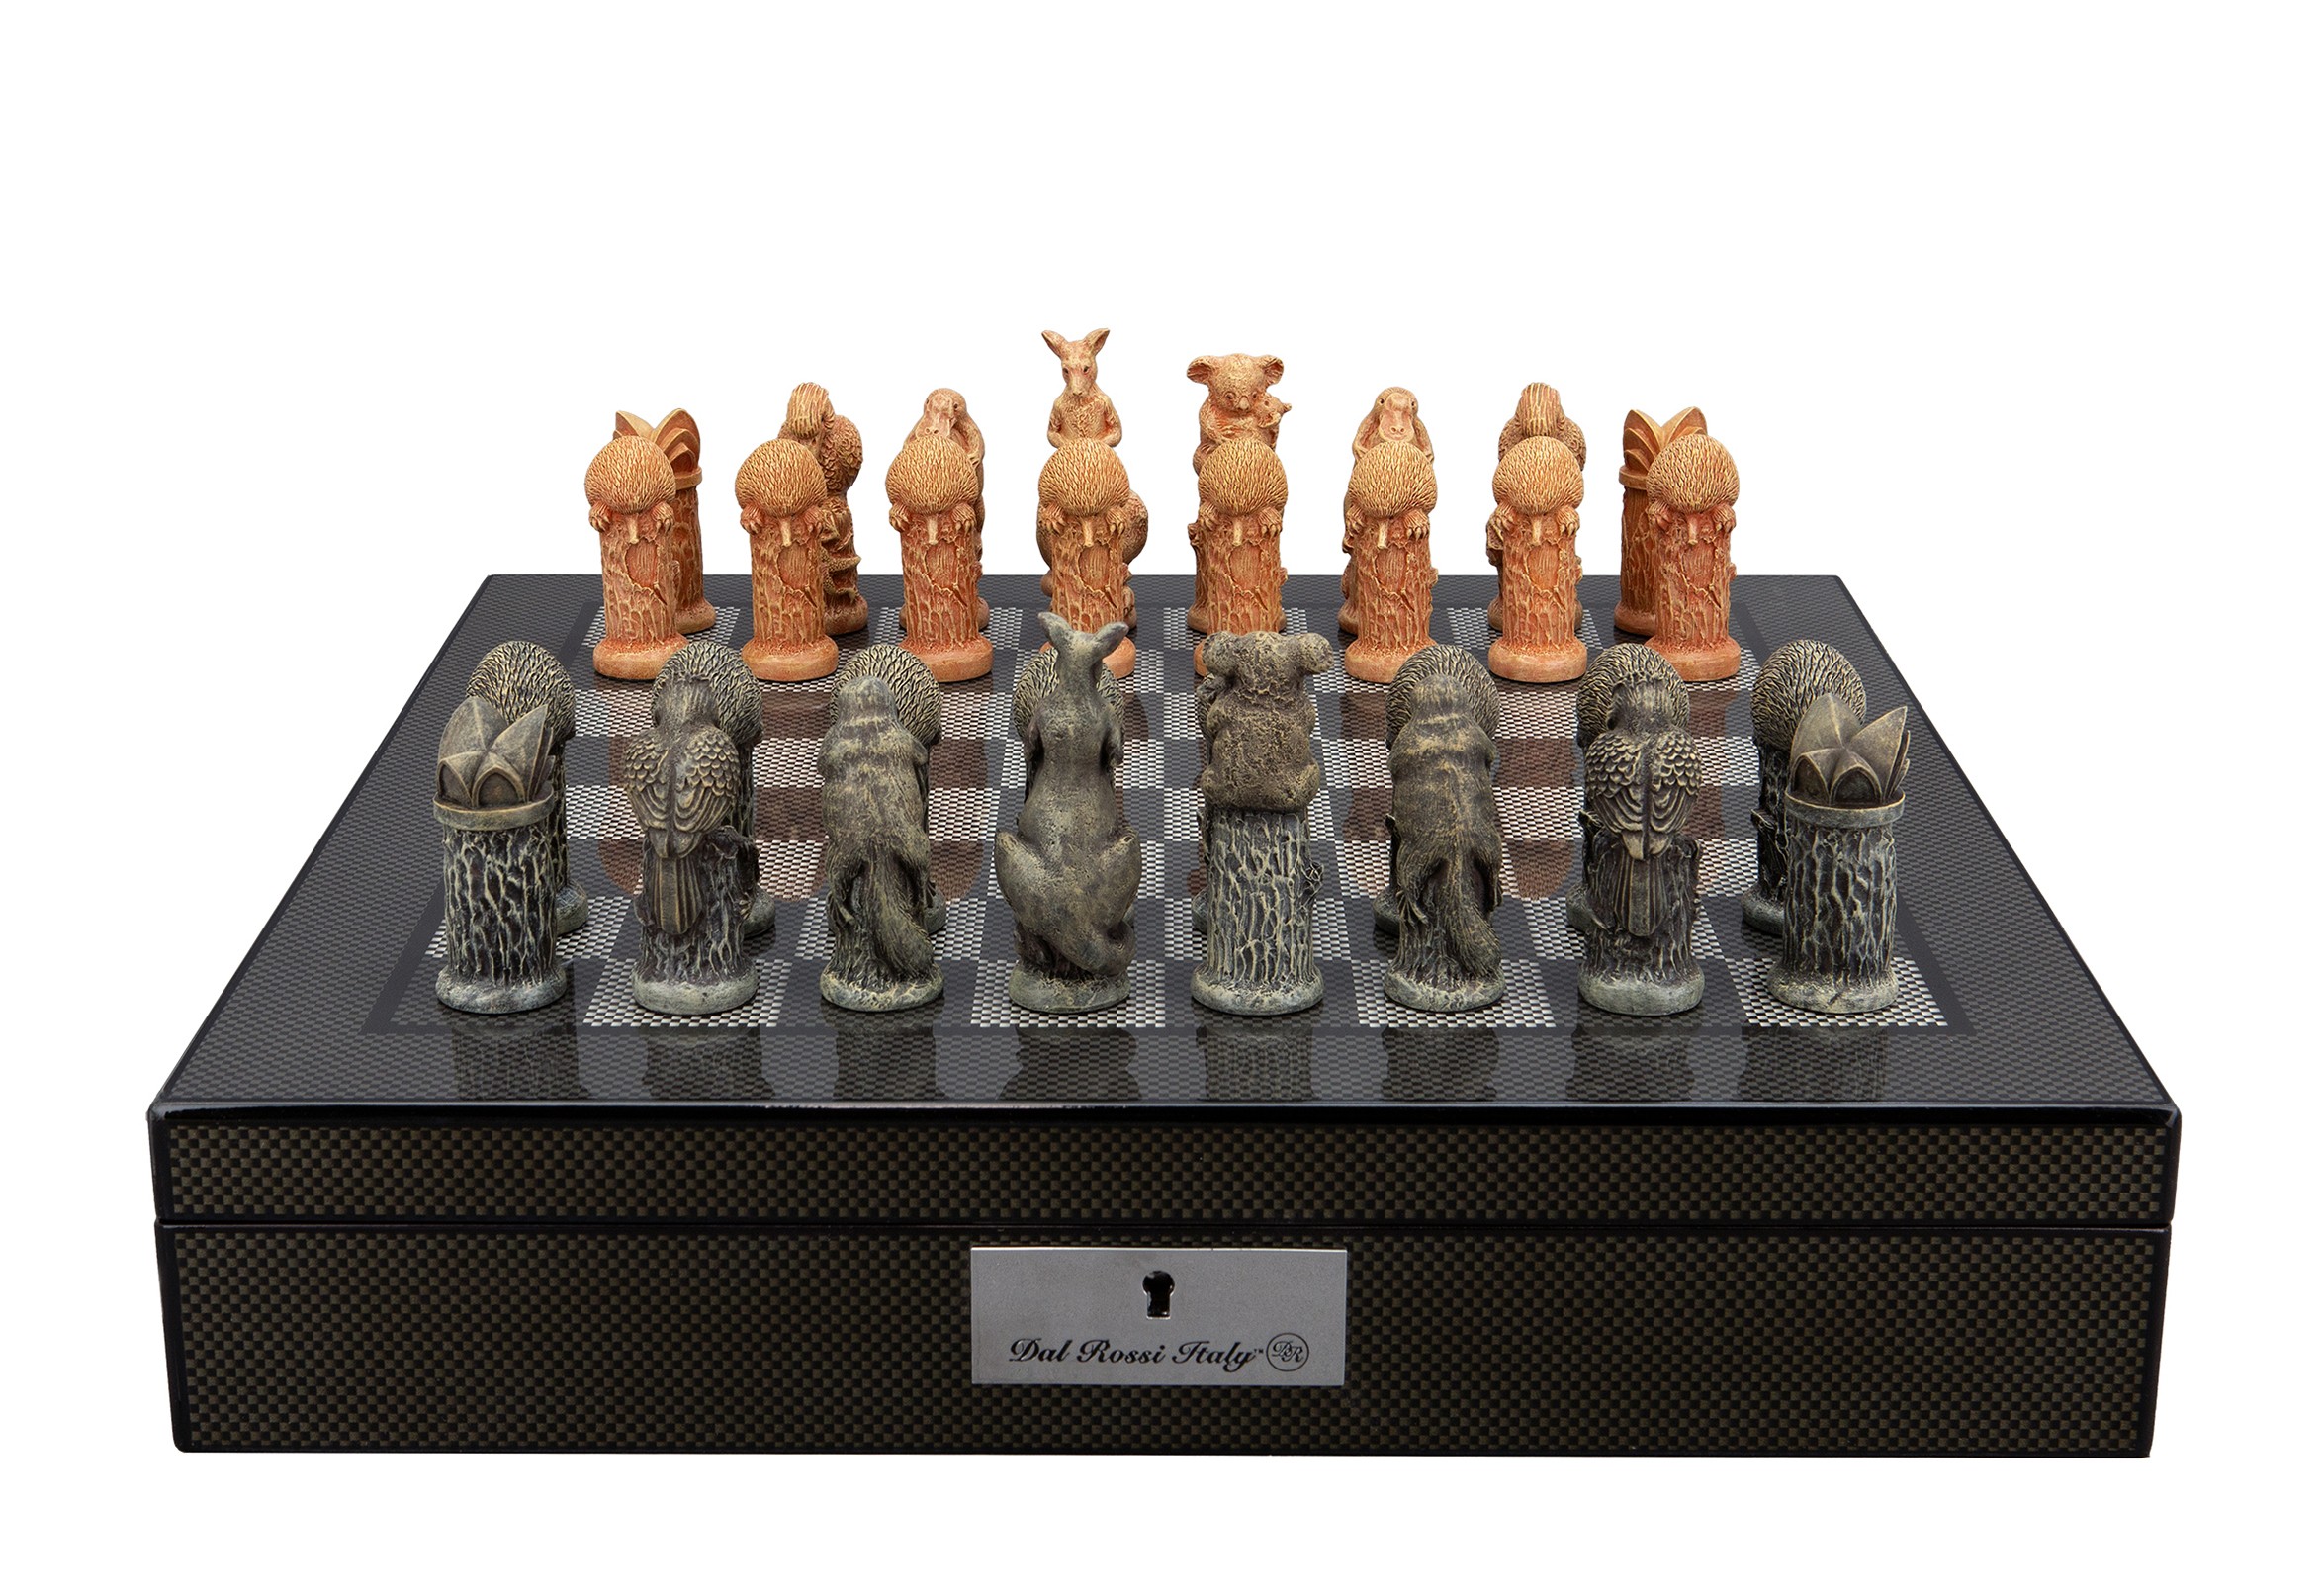 Dal Rossi Hand Paint - Australiana Chessmen on a Carbon Fibre Finish Shiny Chess Box with Compartments 16"